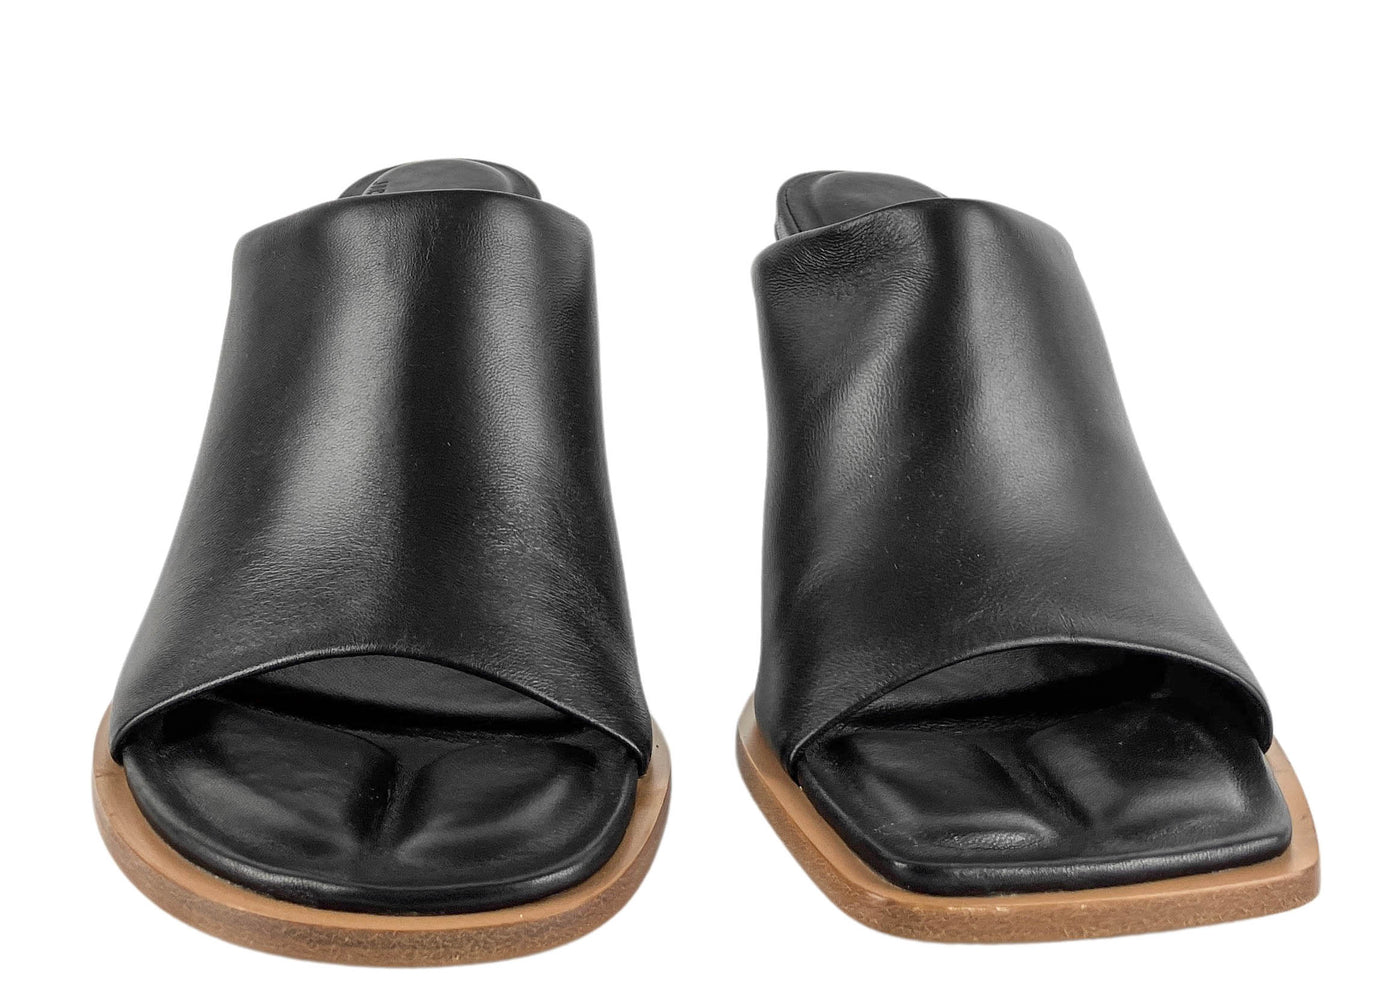 Jacquemus Carre Mules in Black - Discounts on Jacquemus at UAL